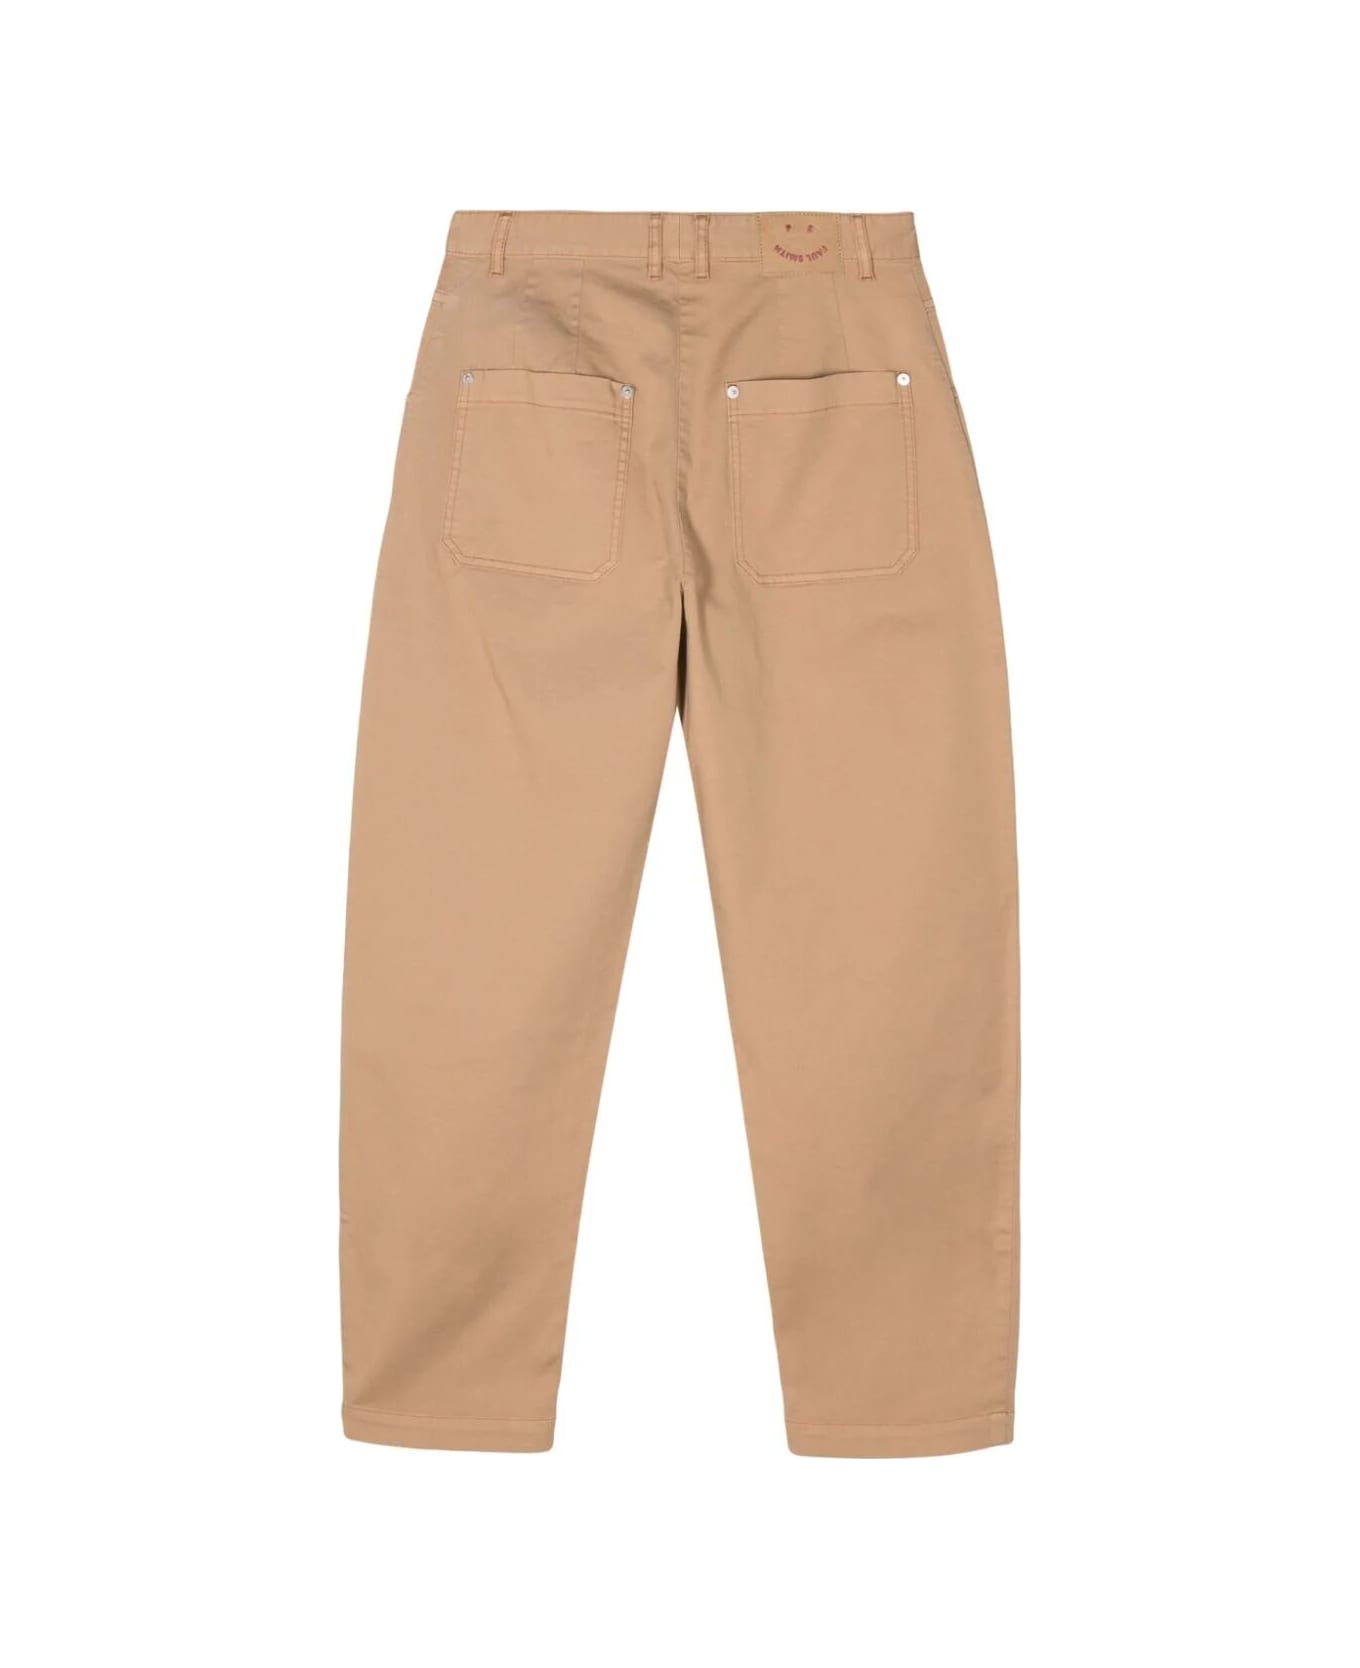 PS by Paul Smith Regular Trouser - Camel